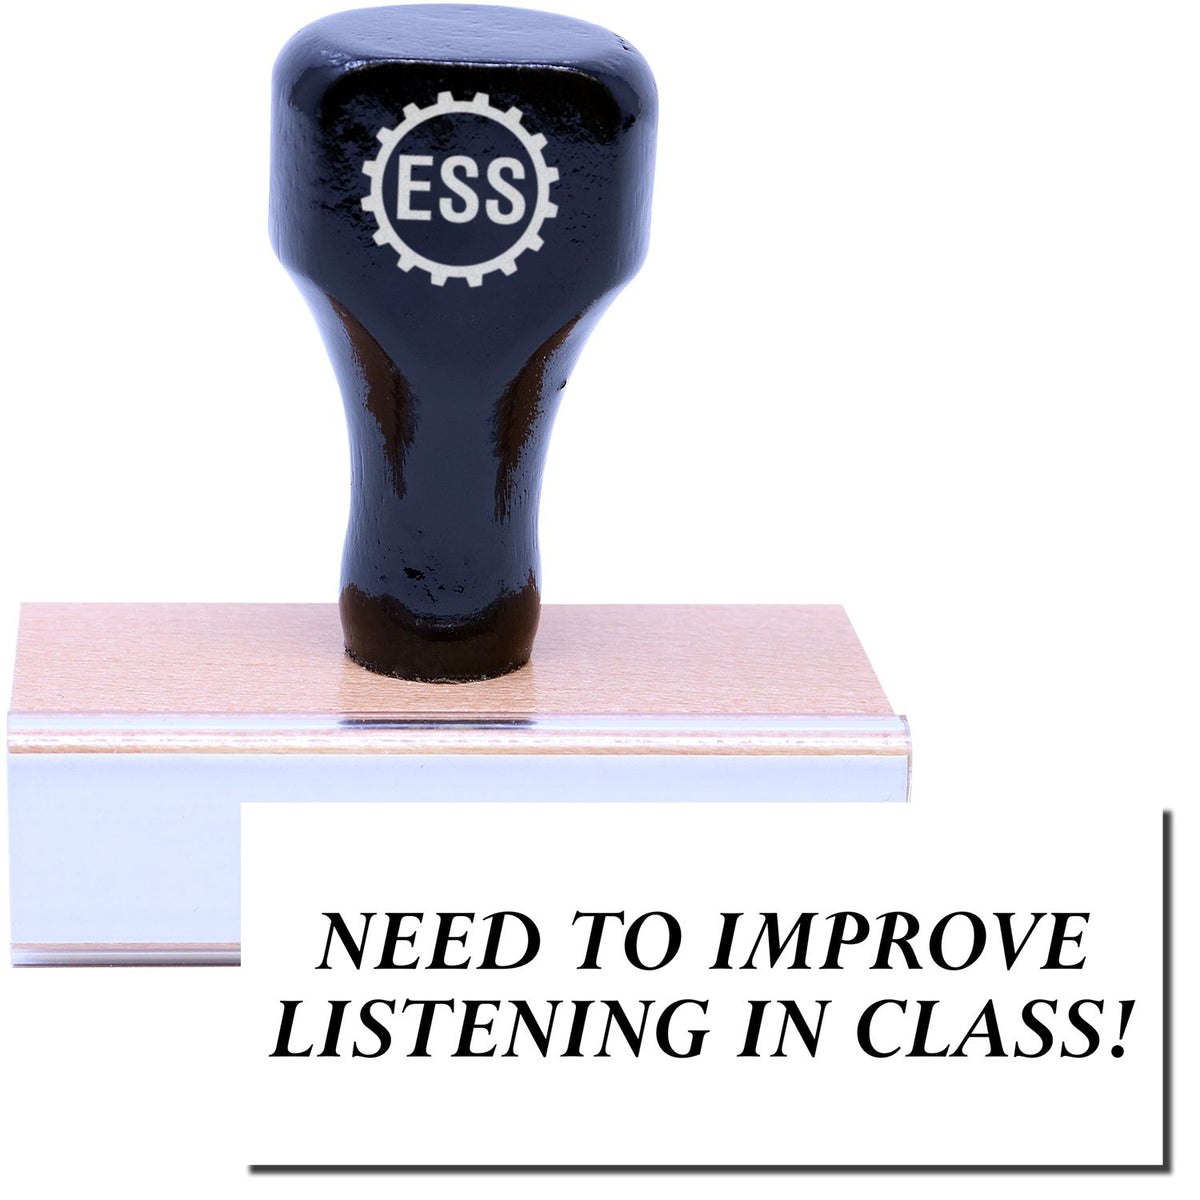 A stock office rubber stamp with a stamped image showing how the text &quot;NEED TO IMPROVE LISTENING IN CLASS!&quot; is displayed after stamping.